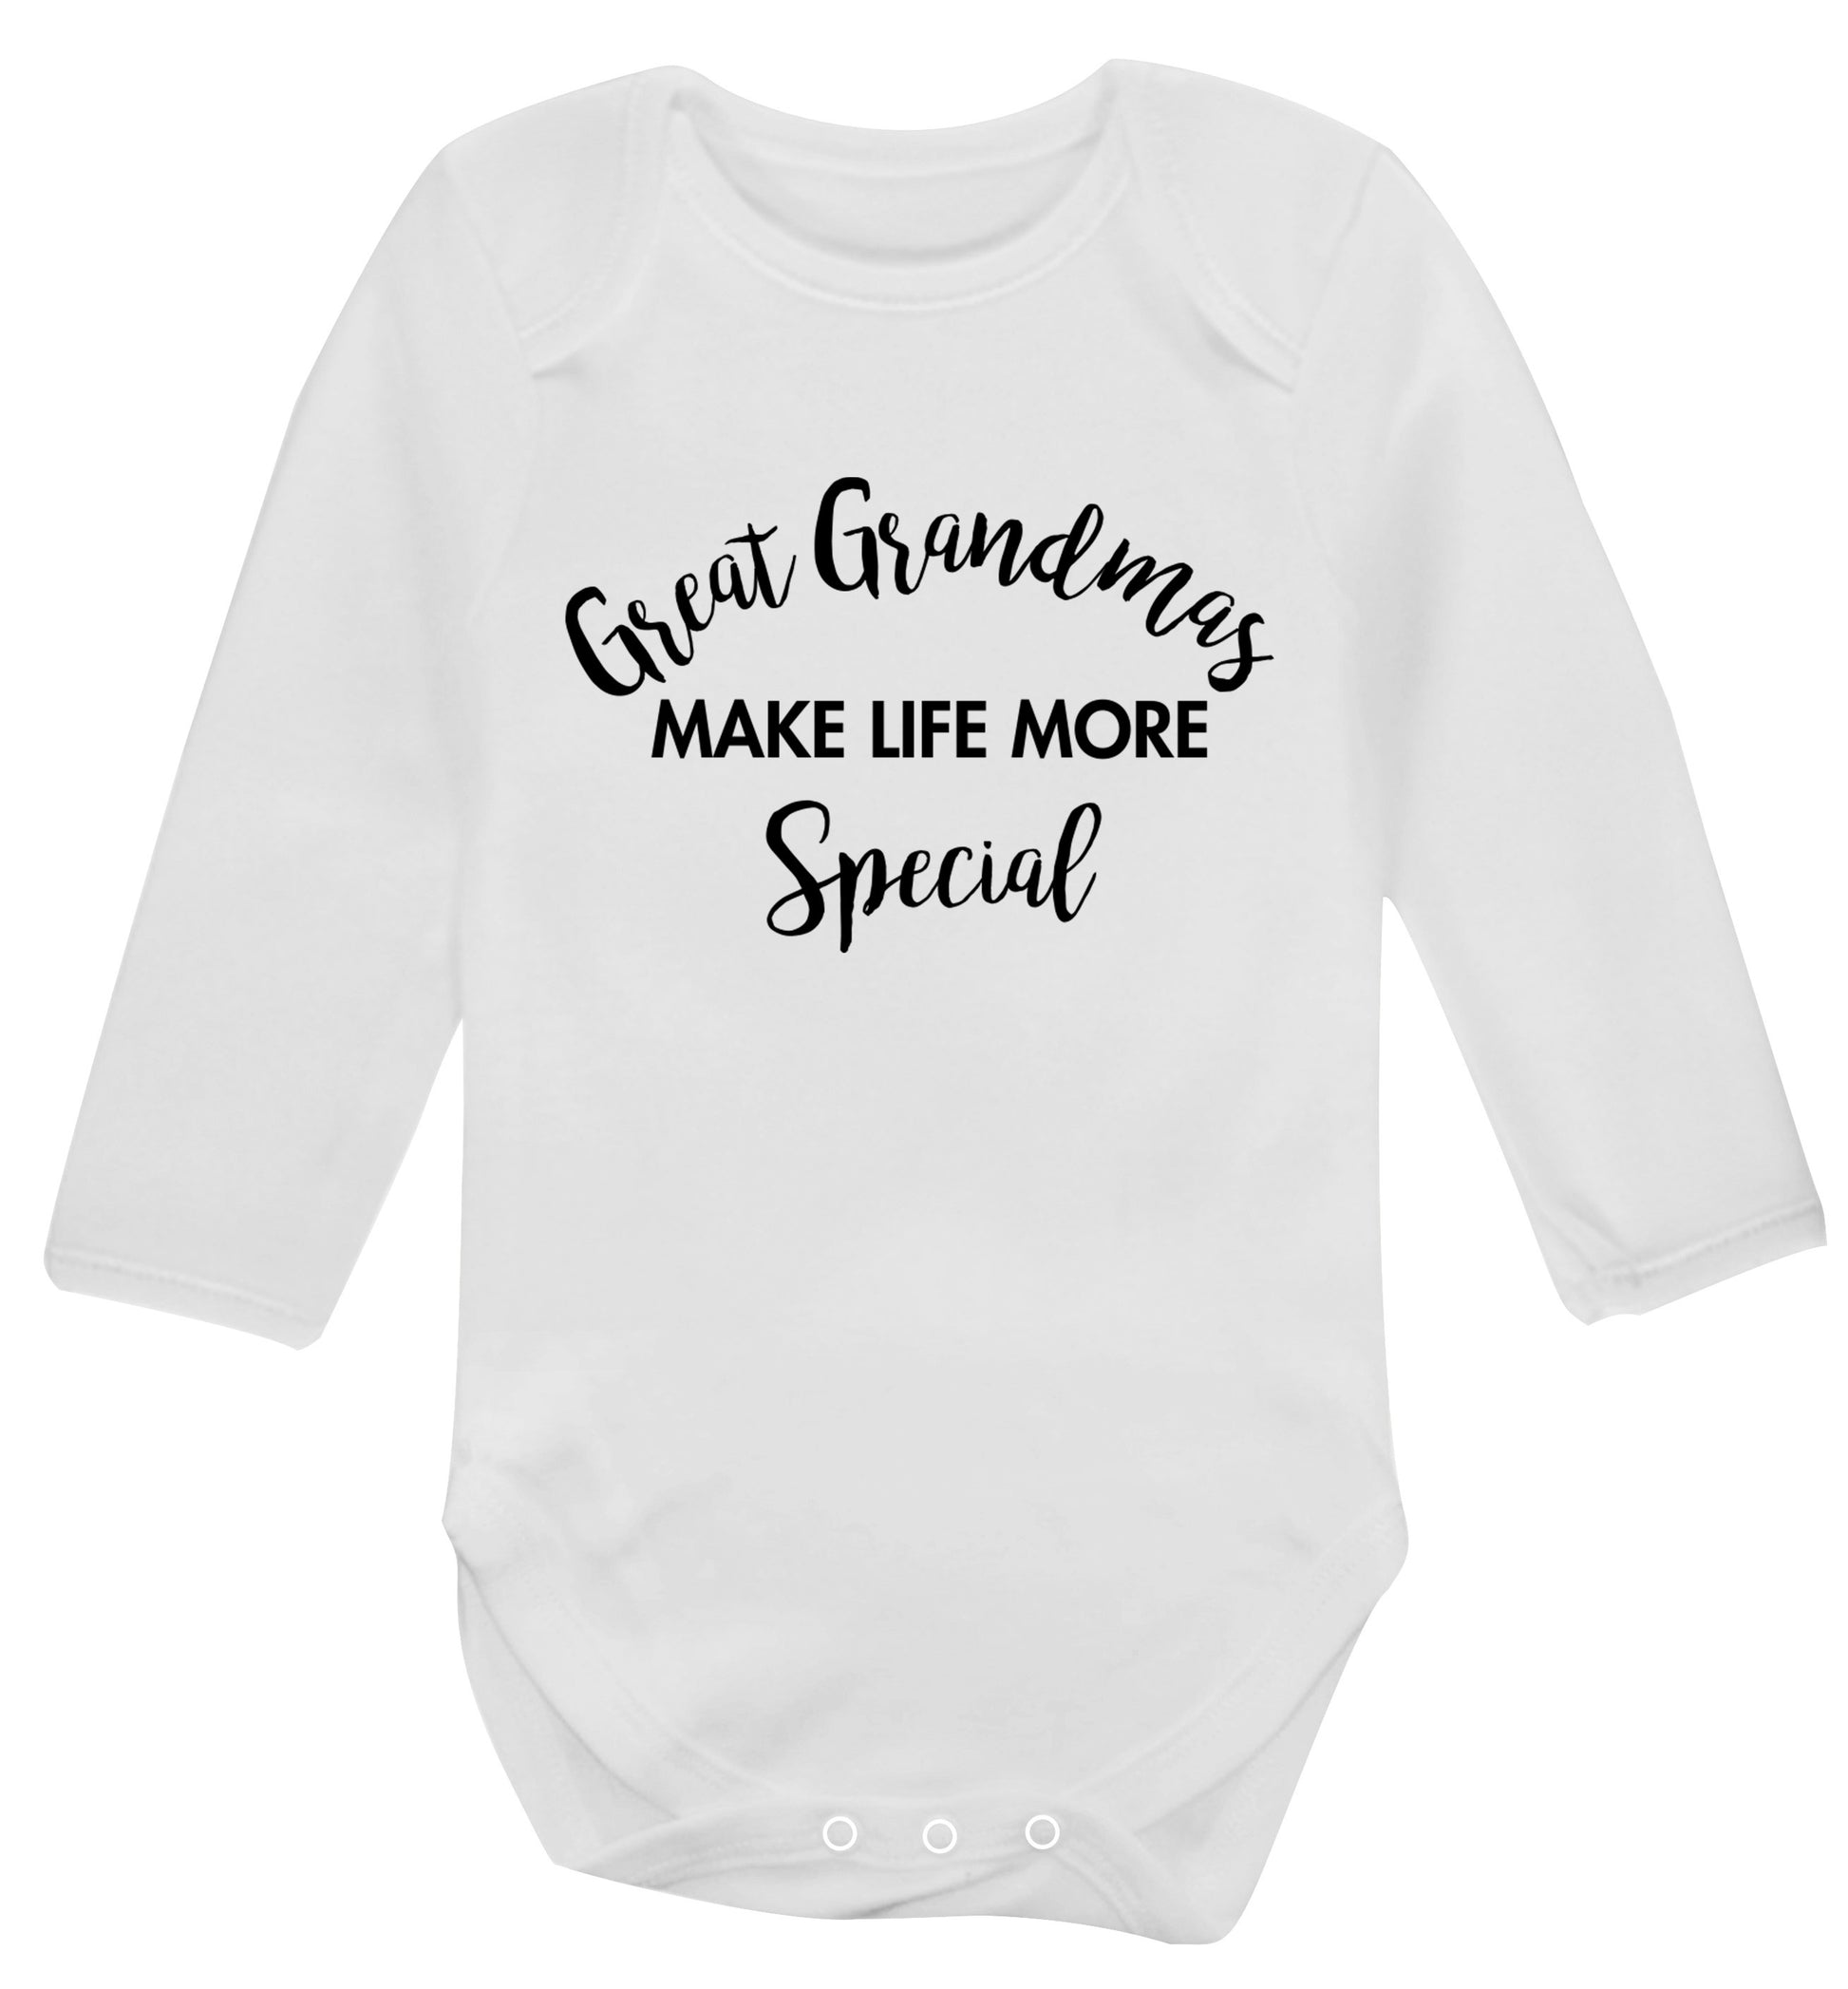 Great Grandmas make life more special Baby Vest long sleeved white 6-12 months